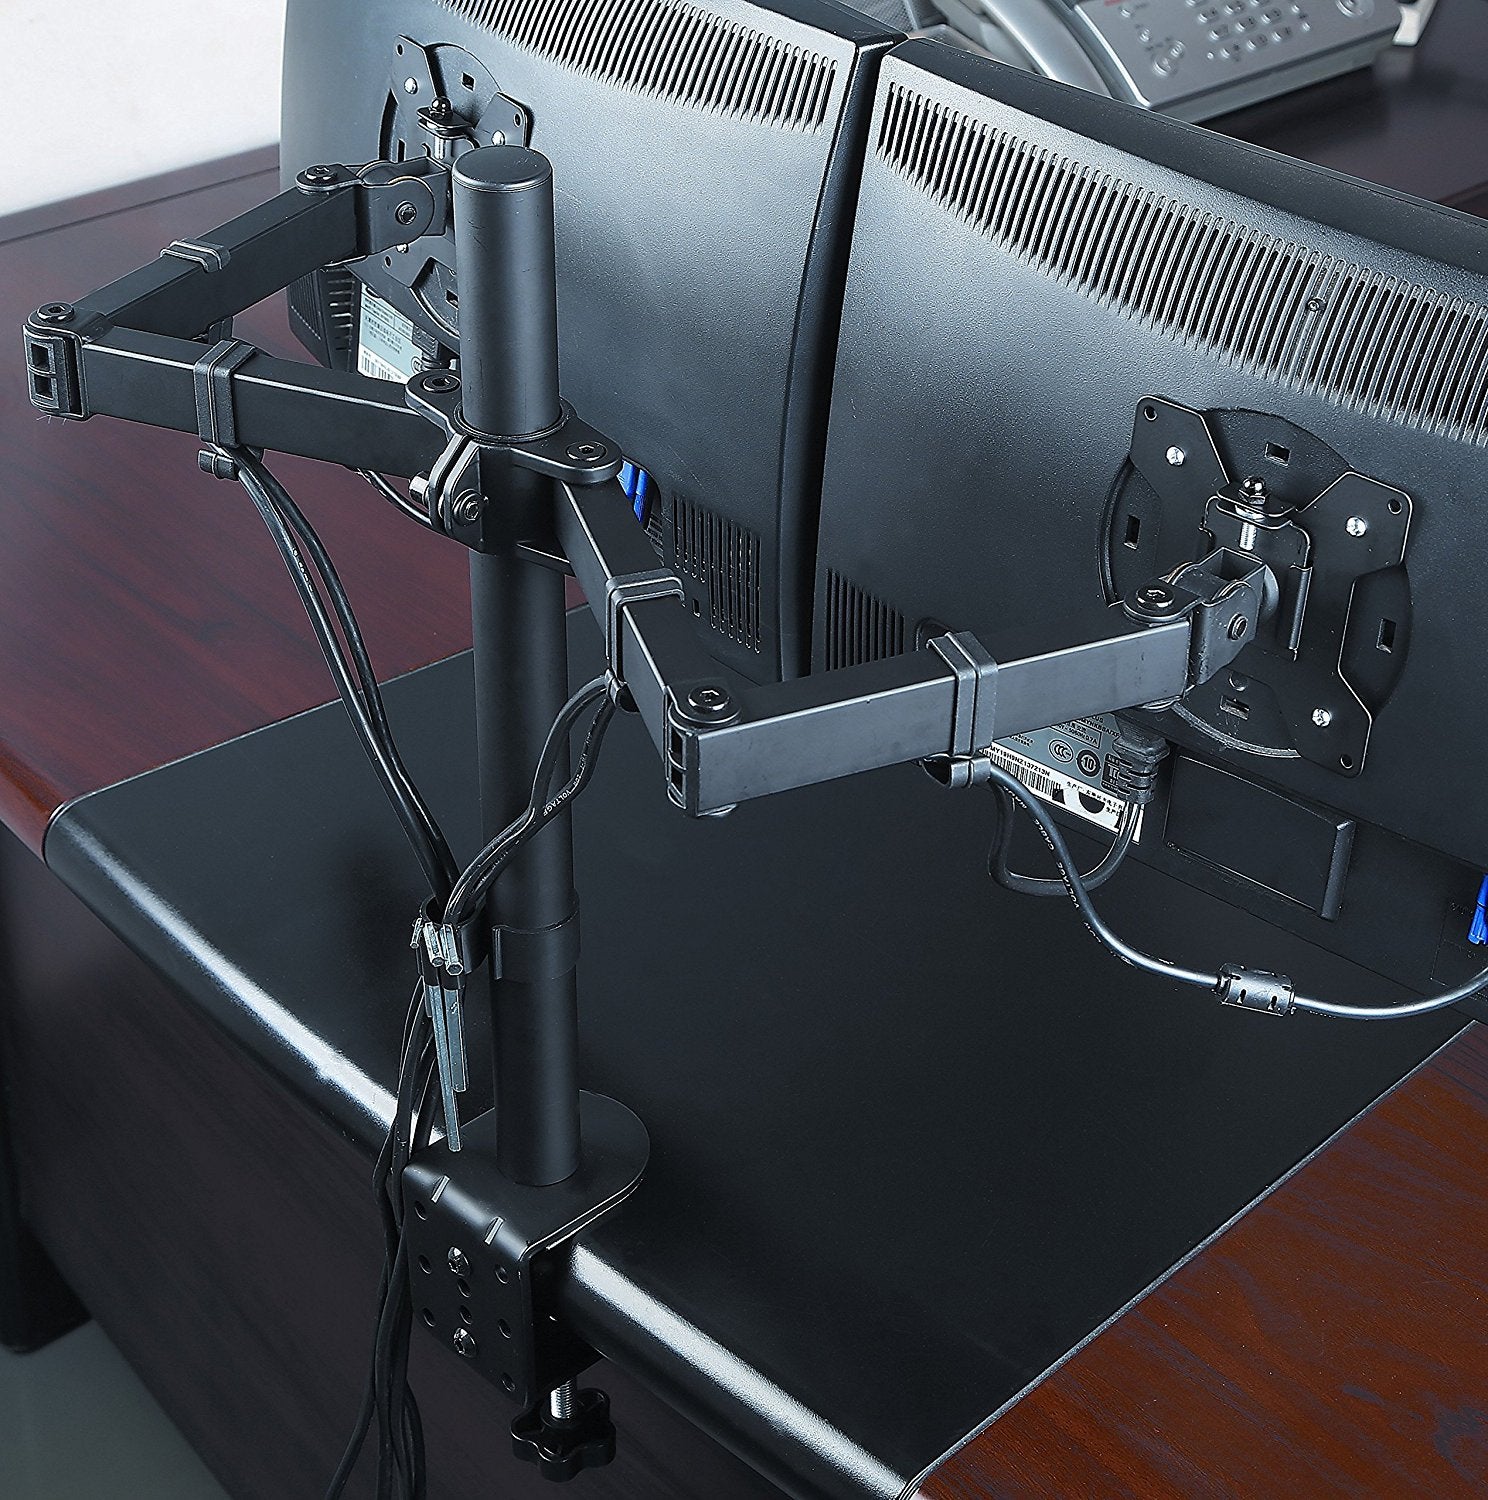 Desk Clamp Double Arm Monitor Mount for VESA 75x75 and 100x100